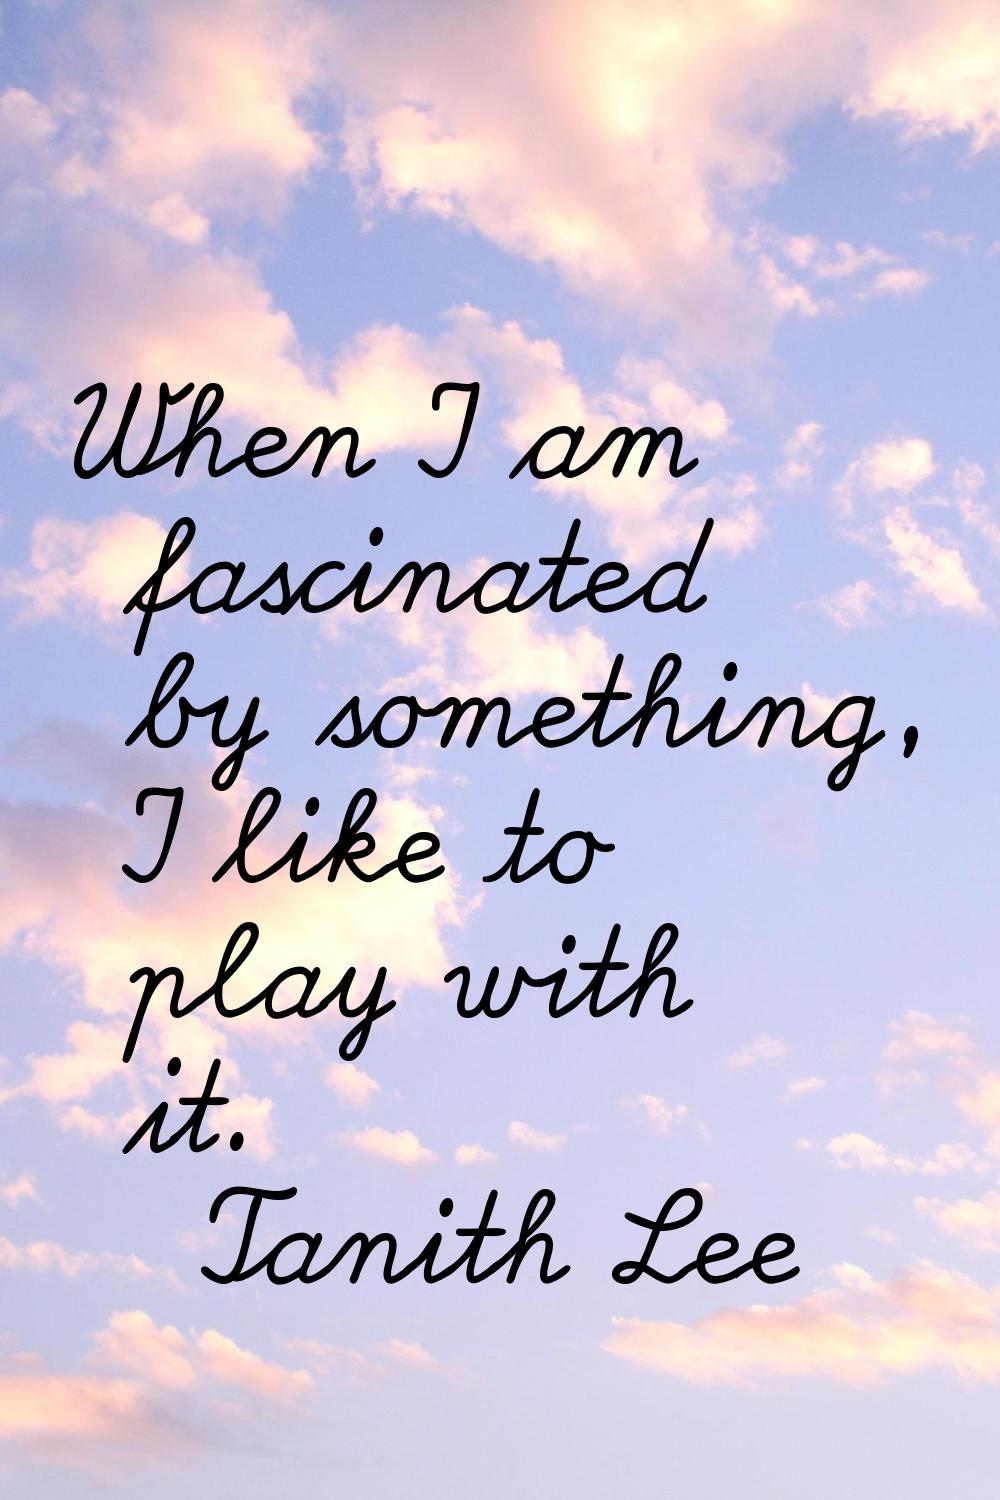 When I am fascinated by something, I like to play with it.